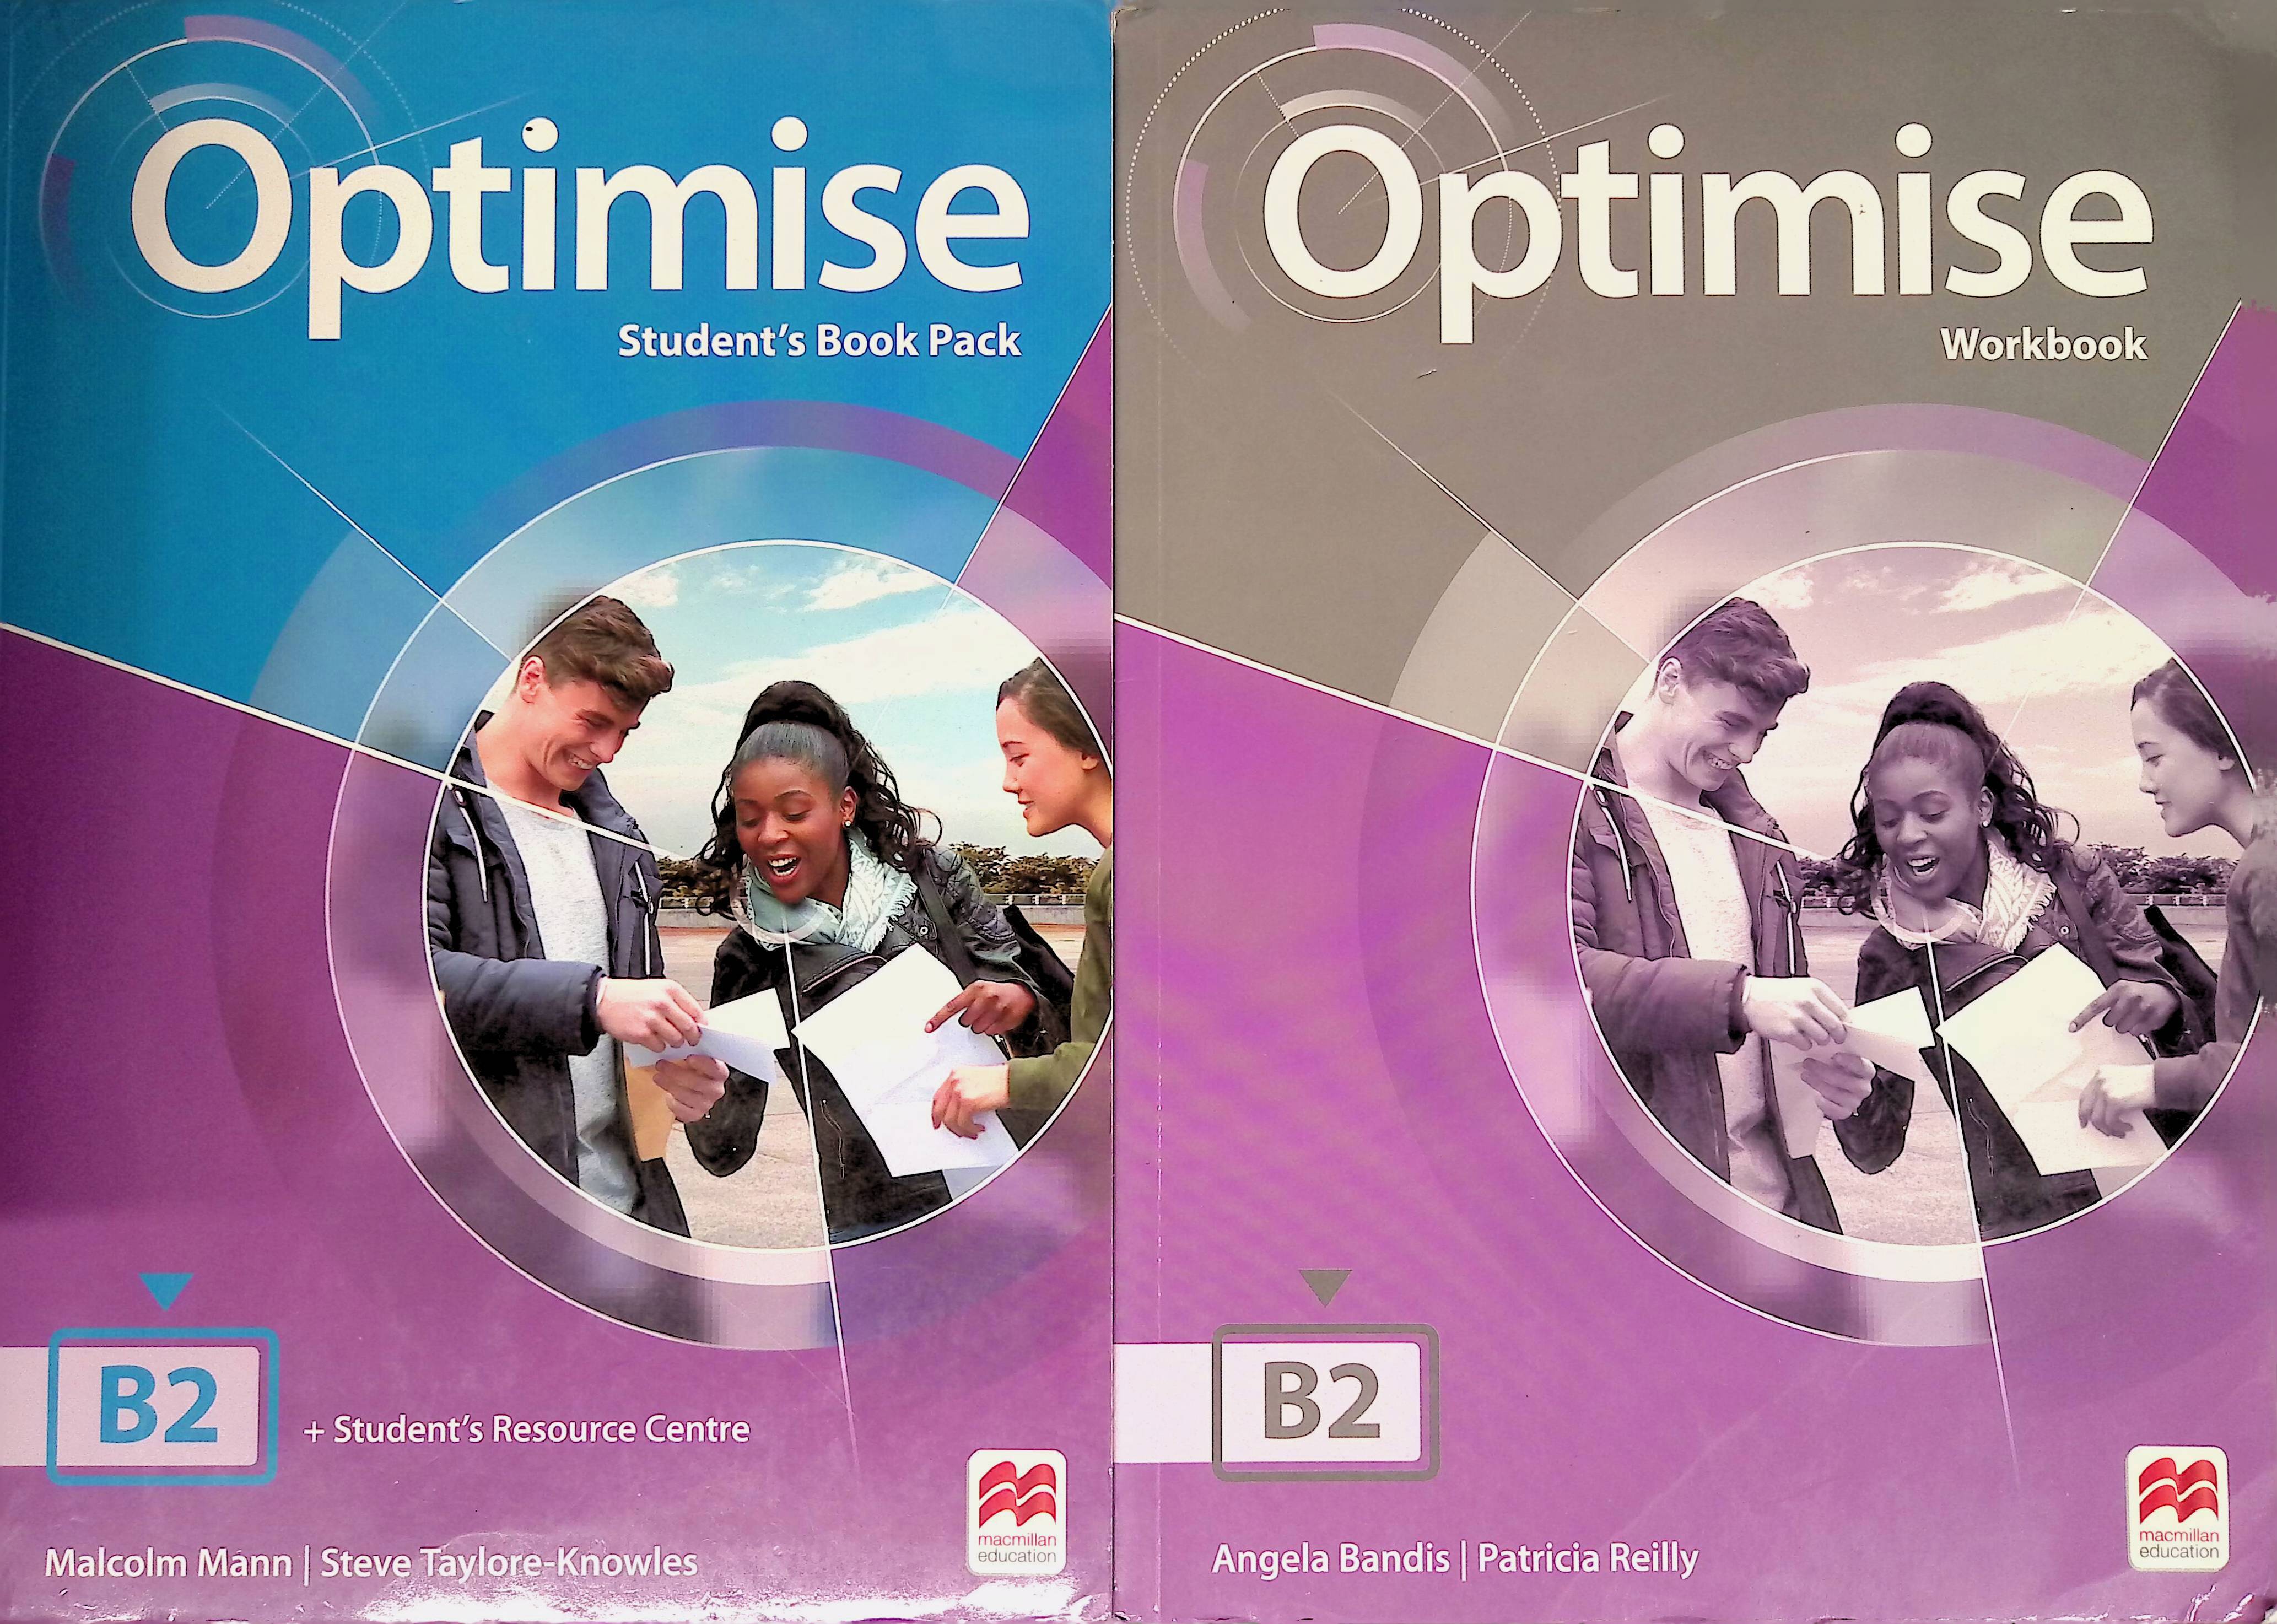 Optimise students book